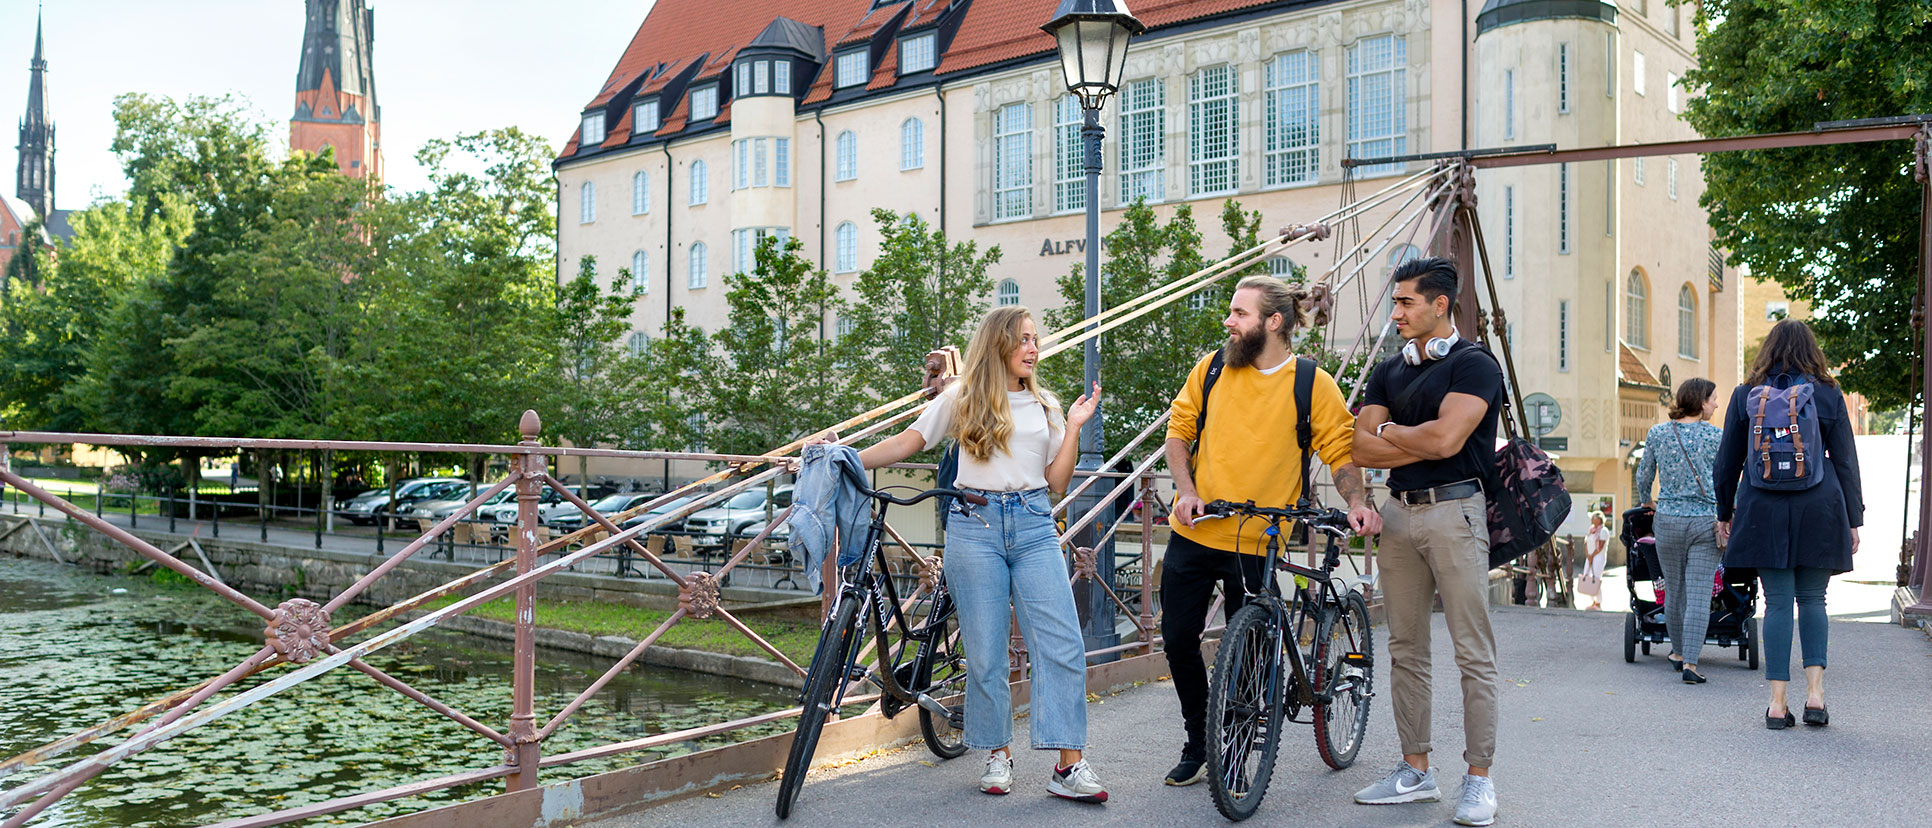 Students with bicycles talking.